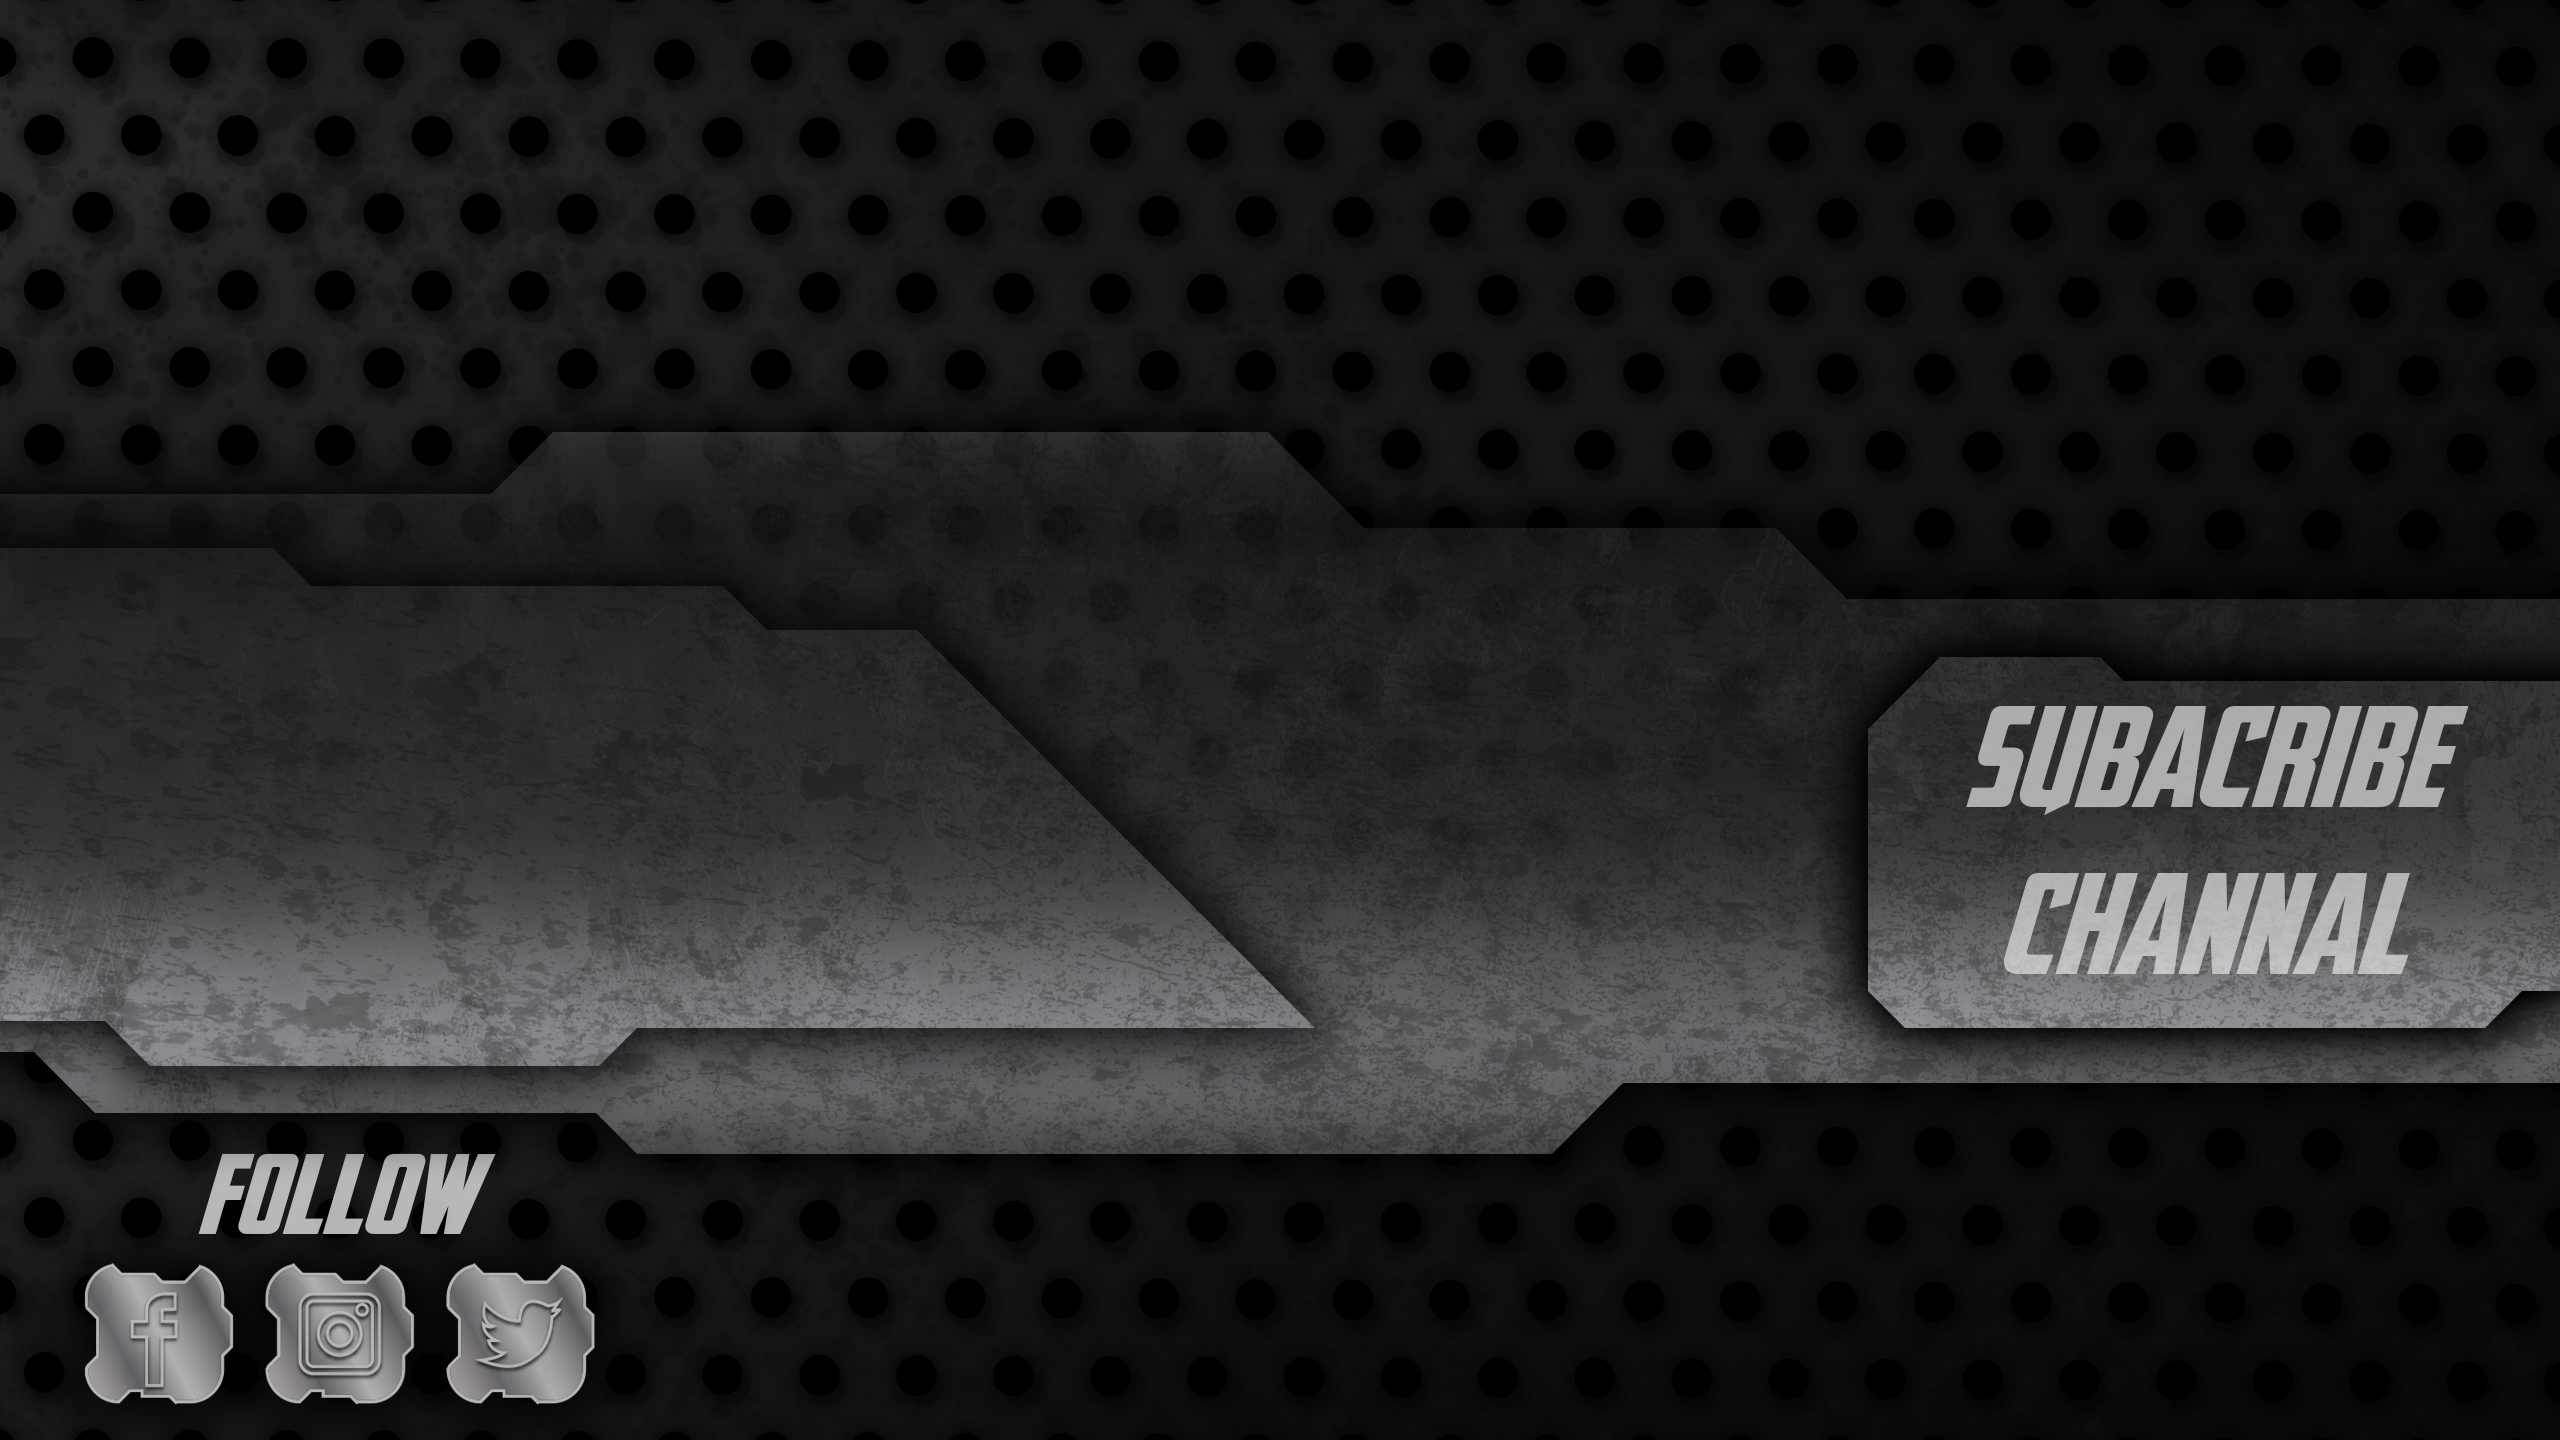 gaming banner background for  in dark grey metalic texture